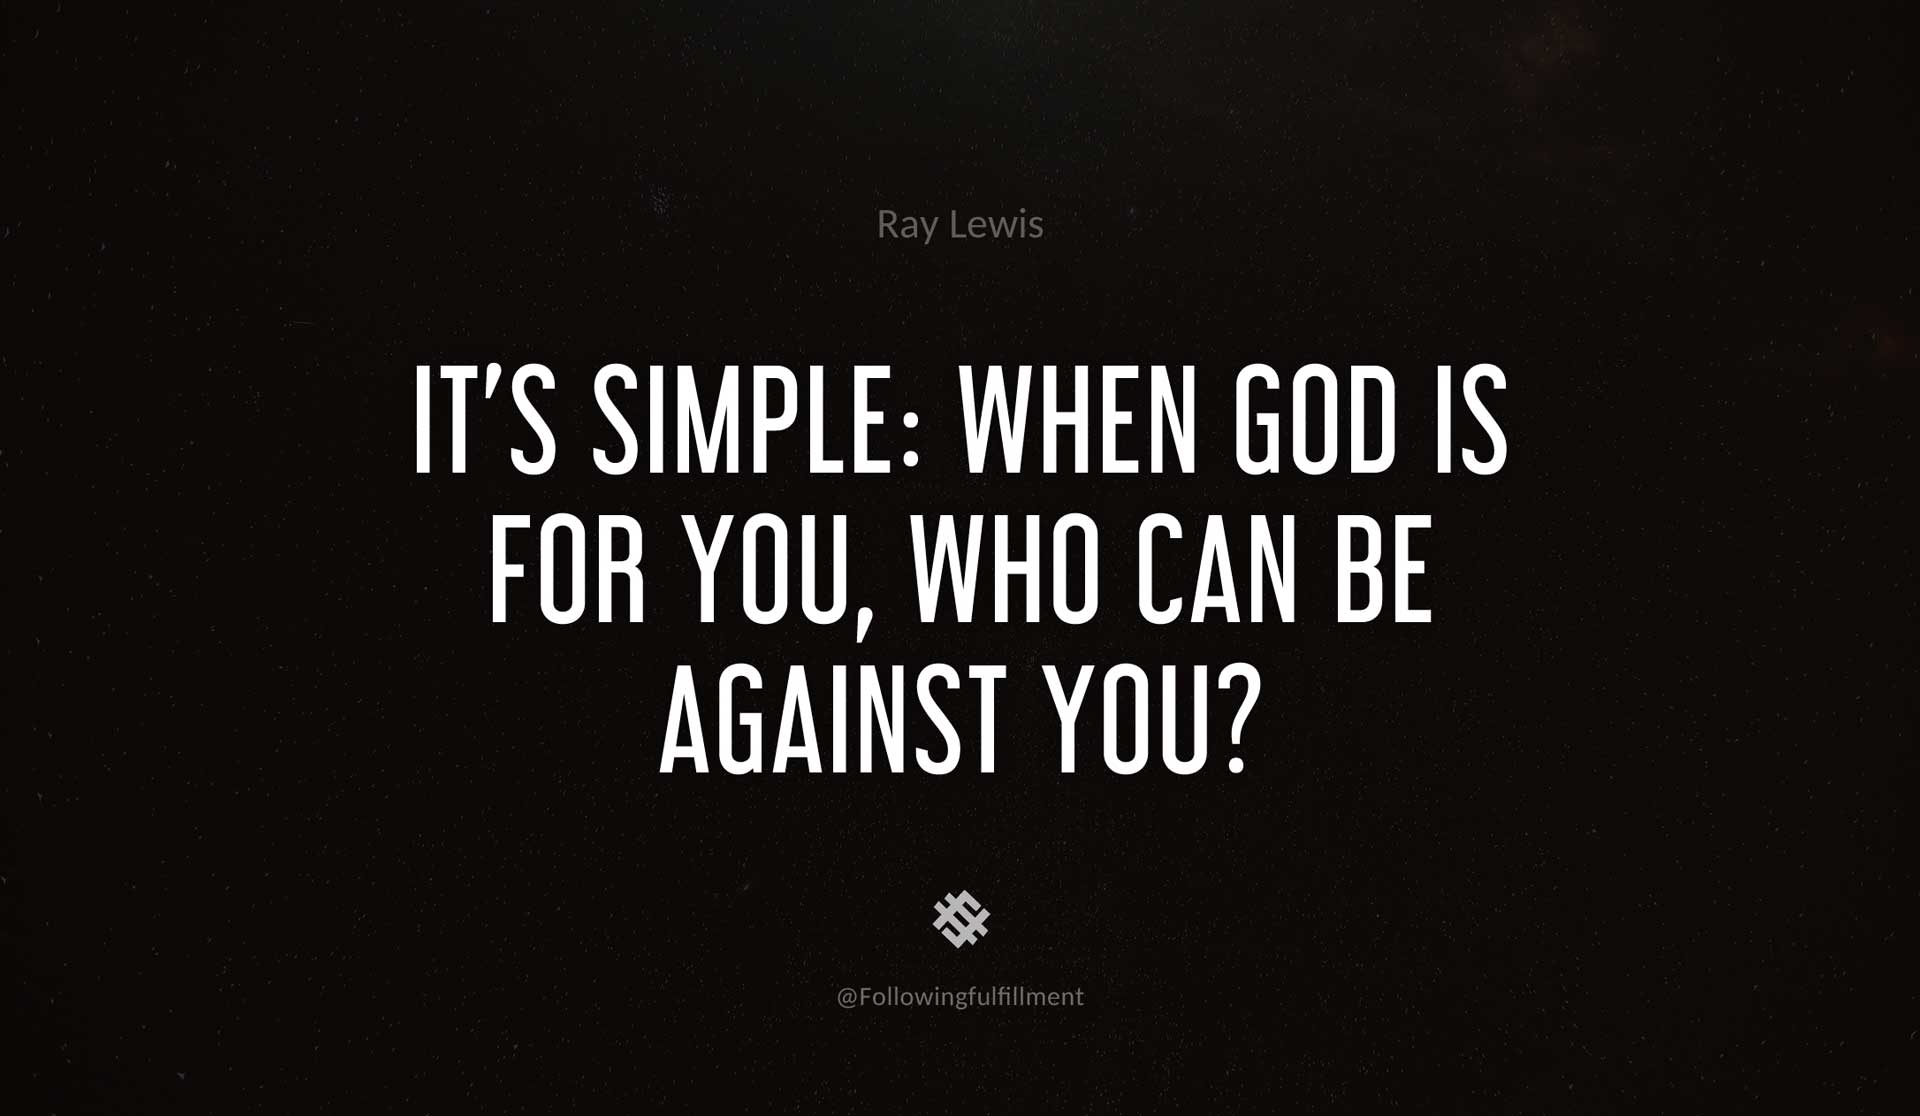 It's-simple--when-God-is-for-you,-who-can-be-against-you--RAY-LEWIS-Quote.jpg